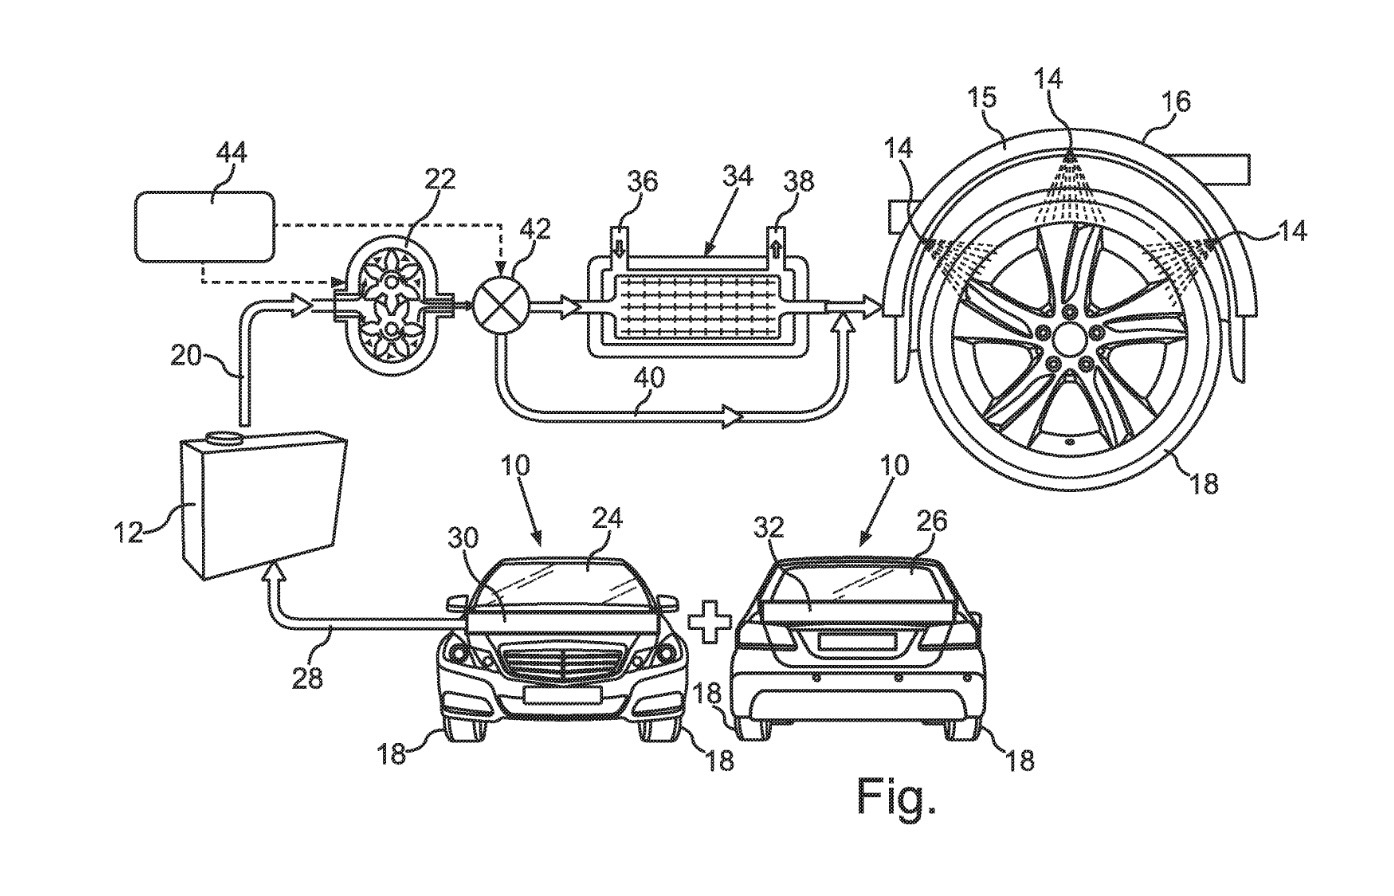 Mercedes-Benz patents interesting tyre water-spray technology